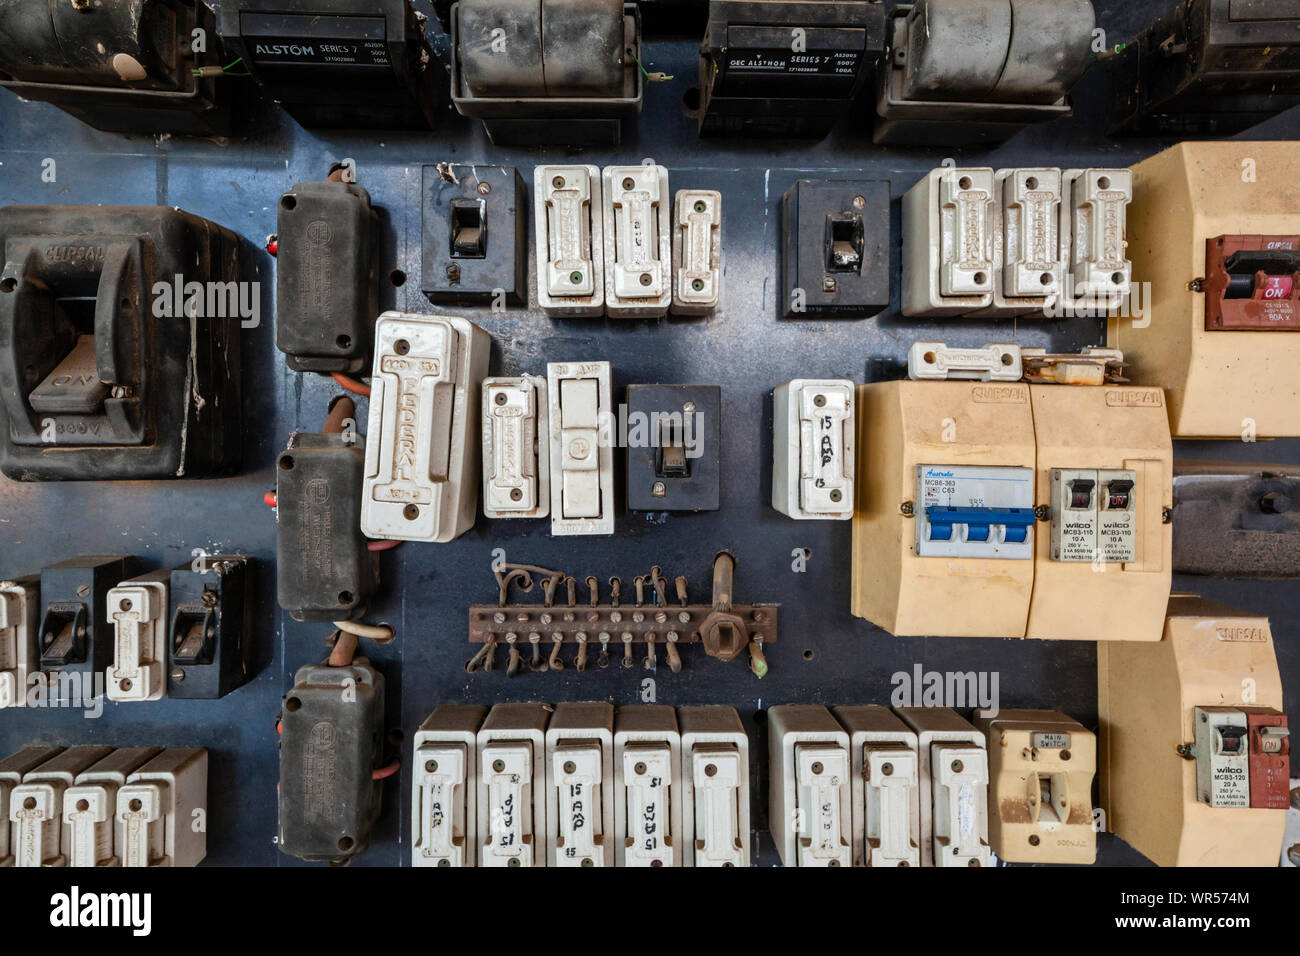 An old fuse box in Australia showing a variety of fuses and switches Stock Photo